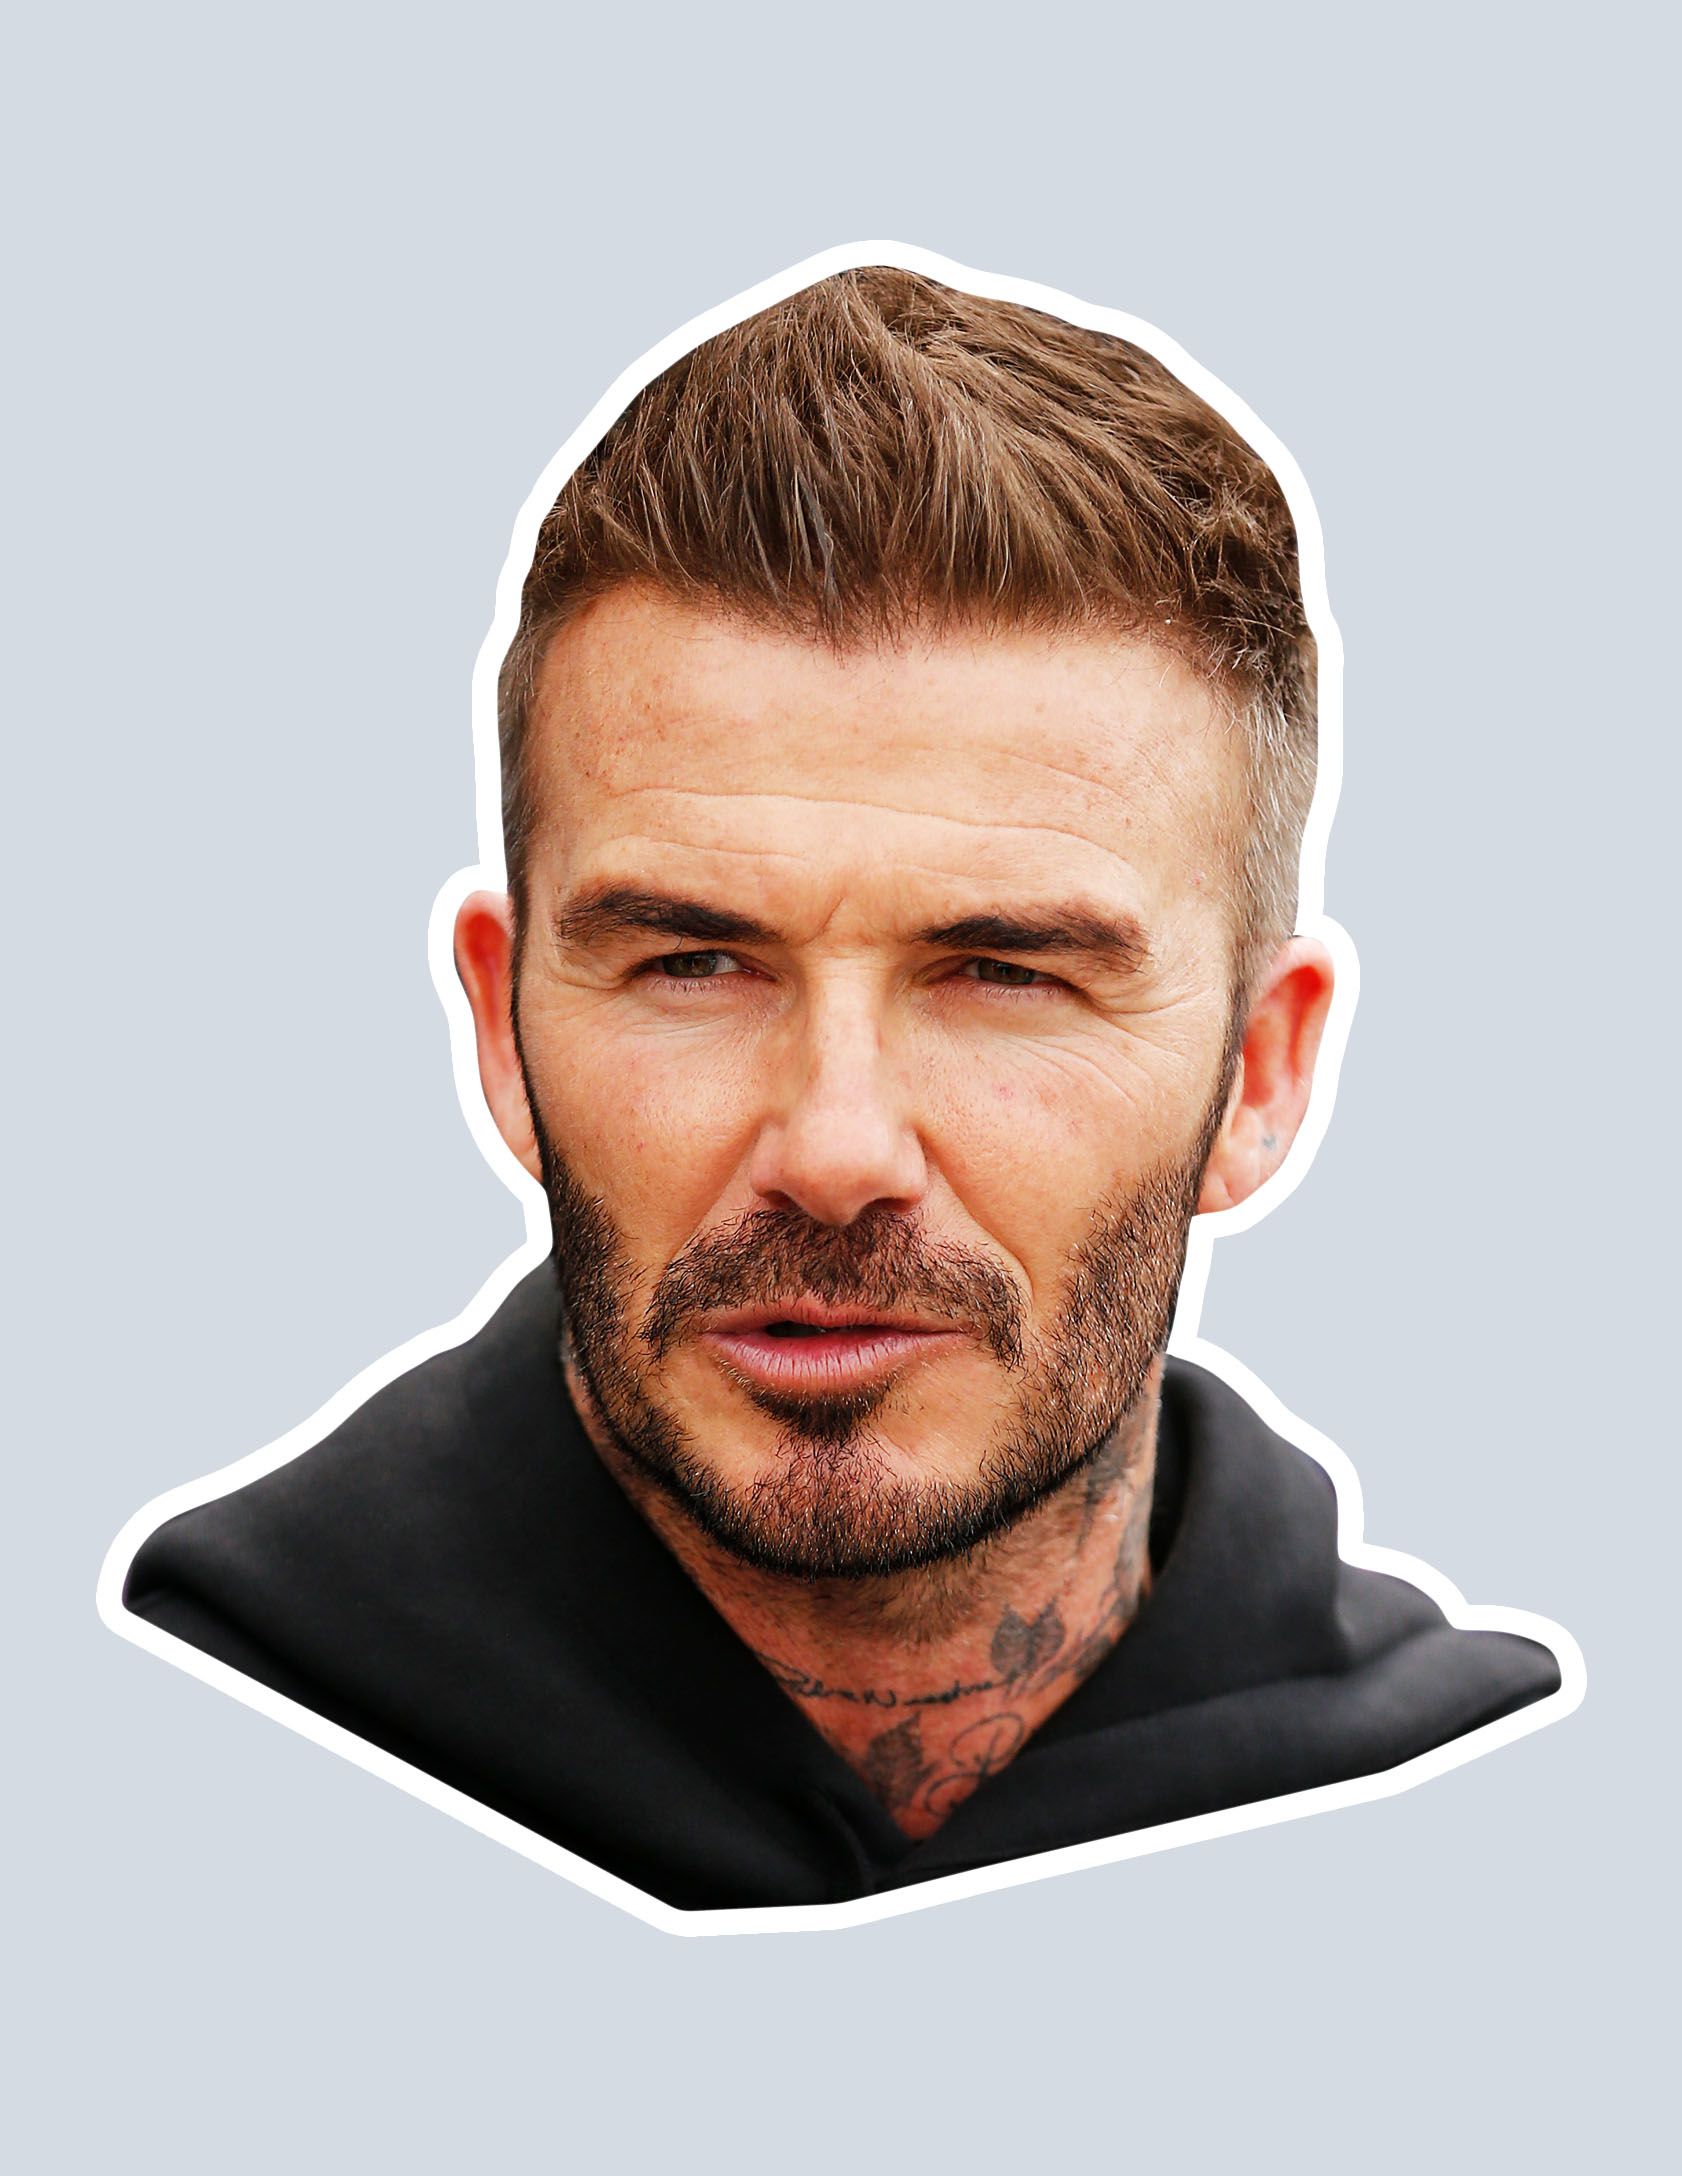 Best Haircuts for Men with a Square Face | Haircut for square face, Face  shape hairstyles, Hair wax for men